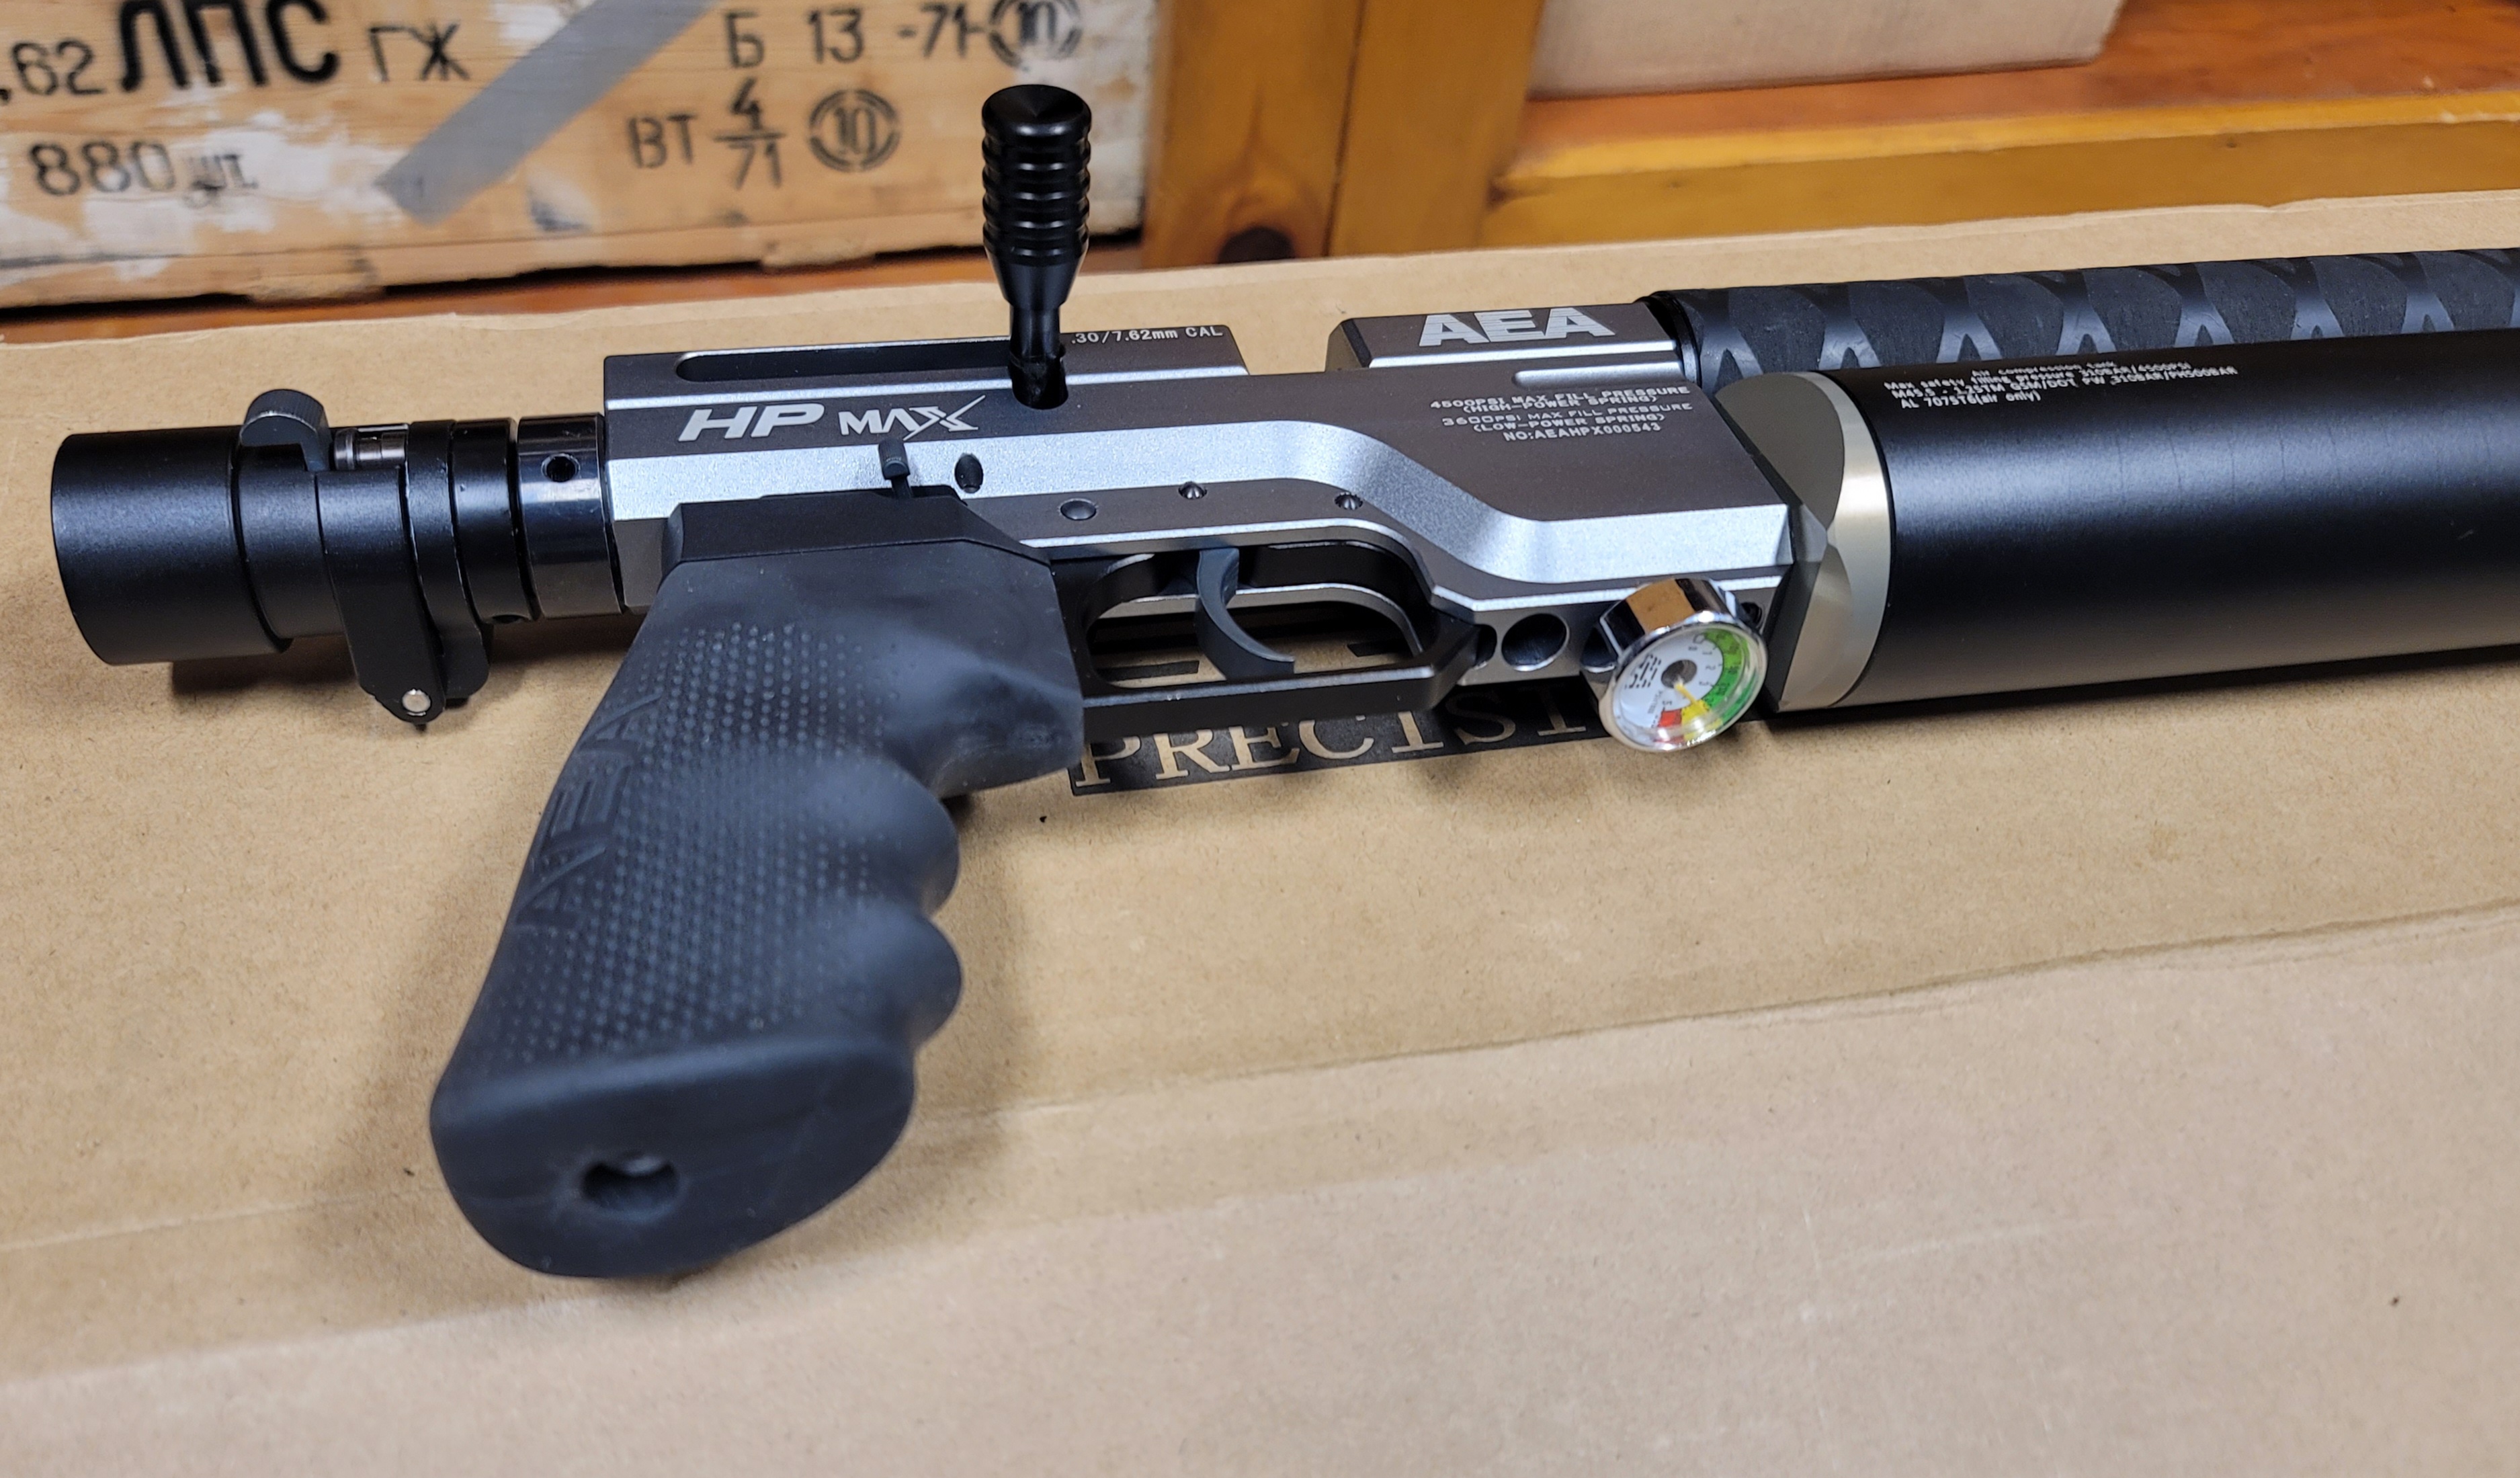 PCP Rifle - .30 AEA SS HP Max with some extras